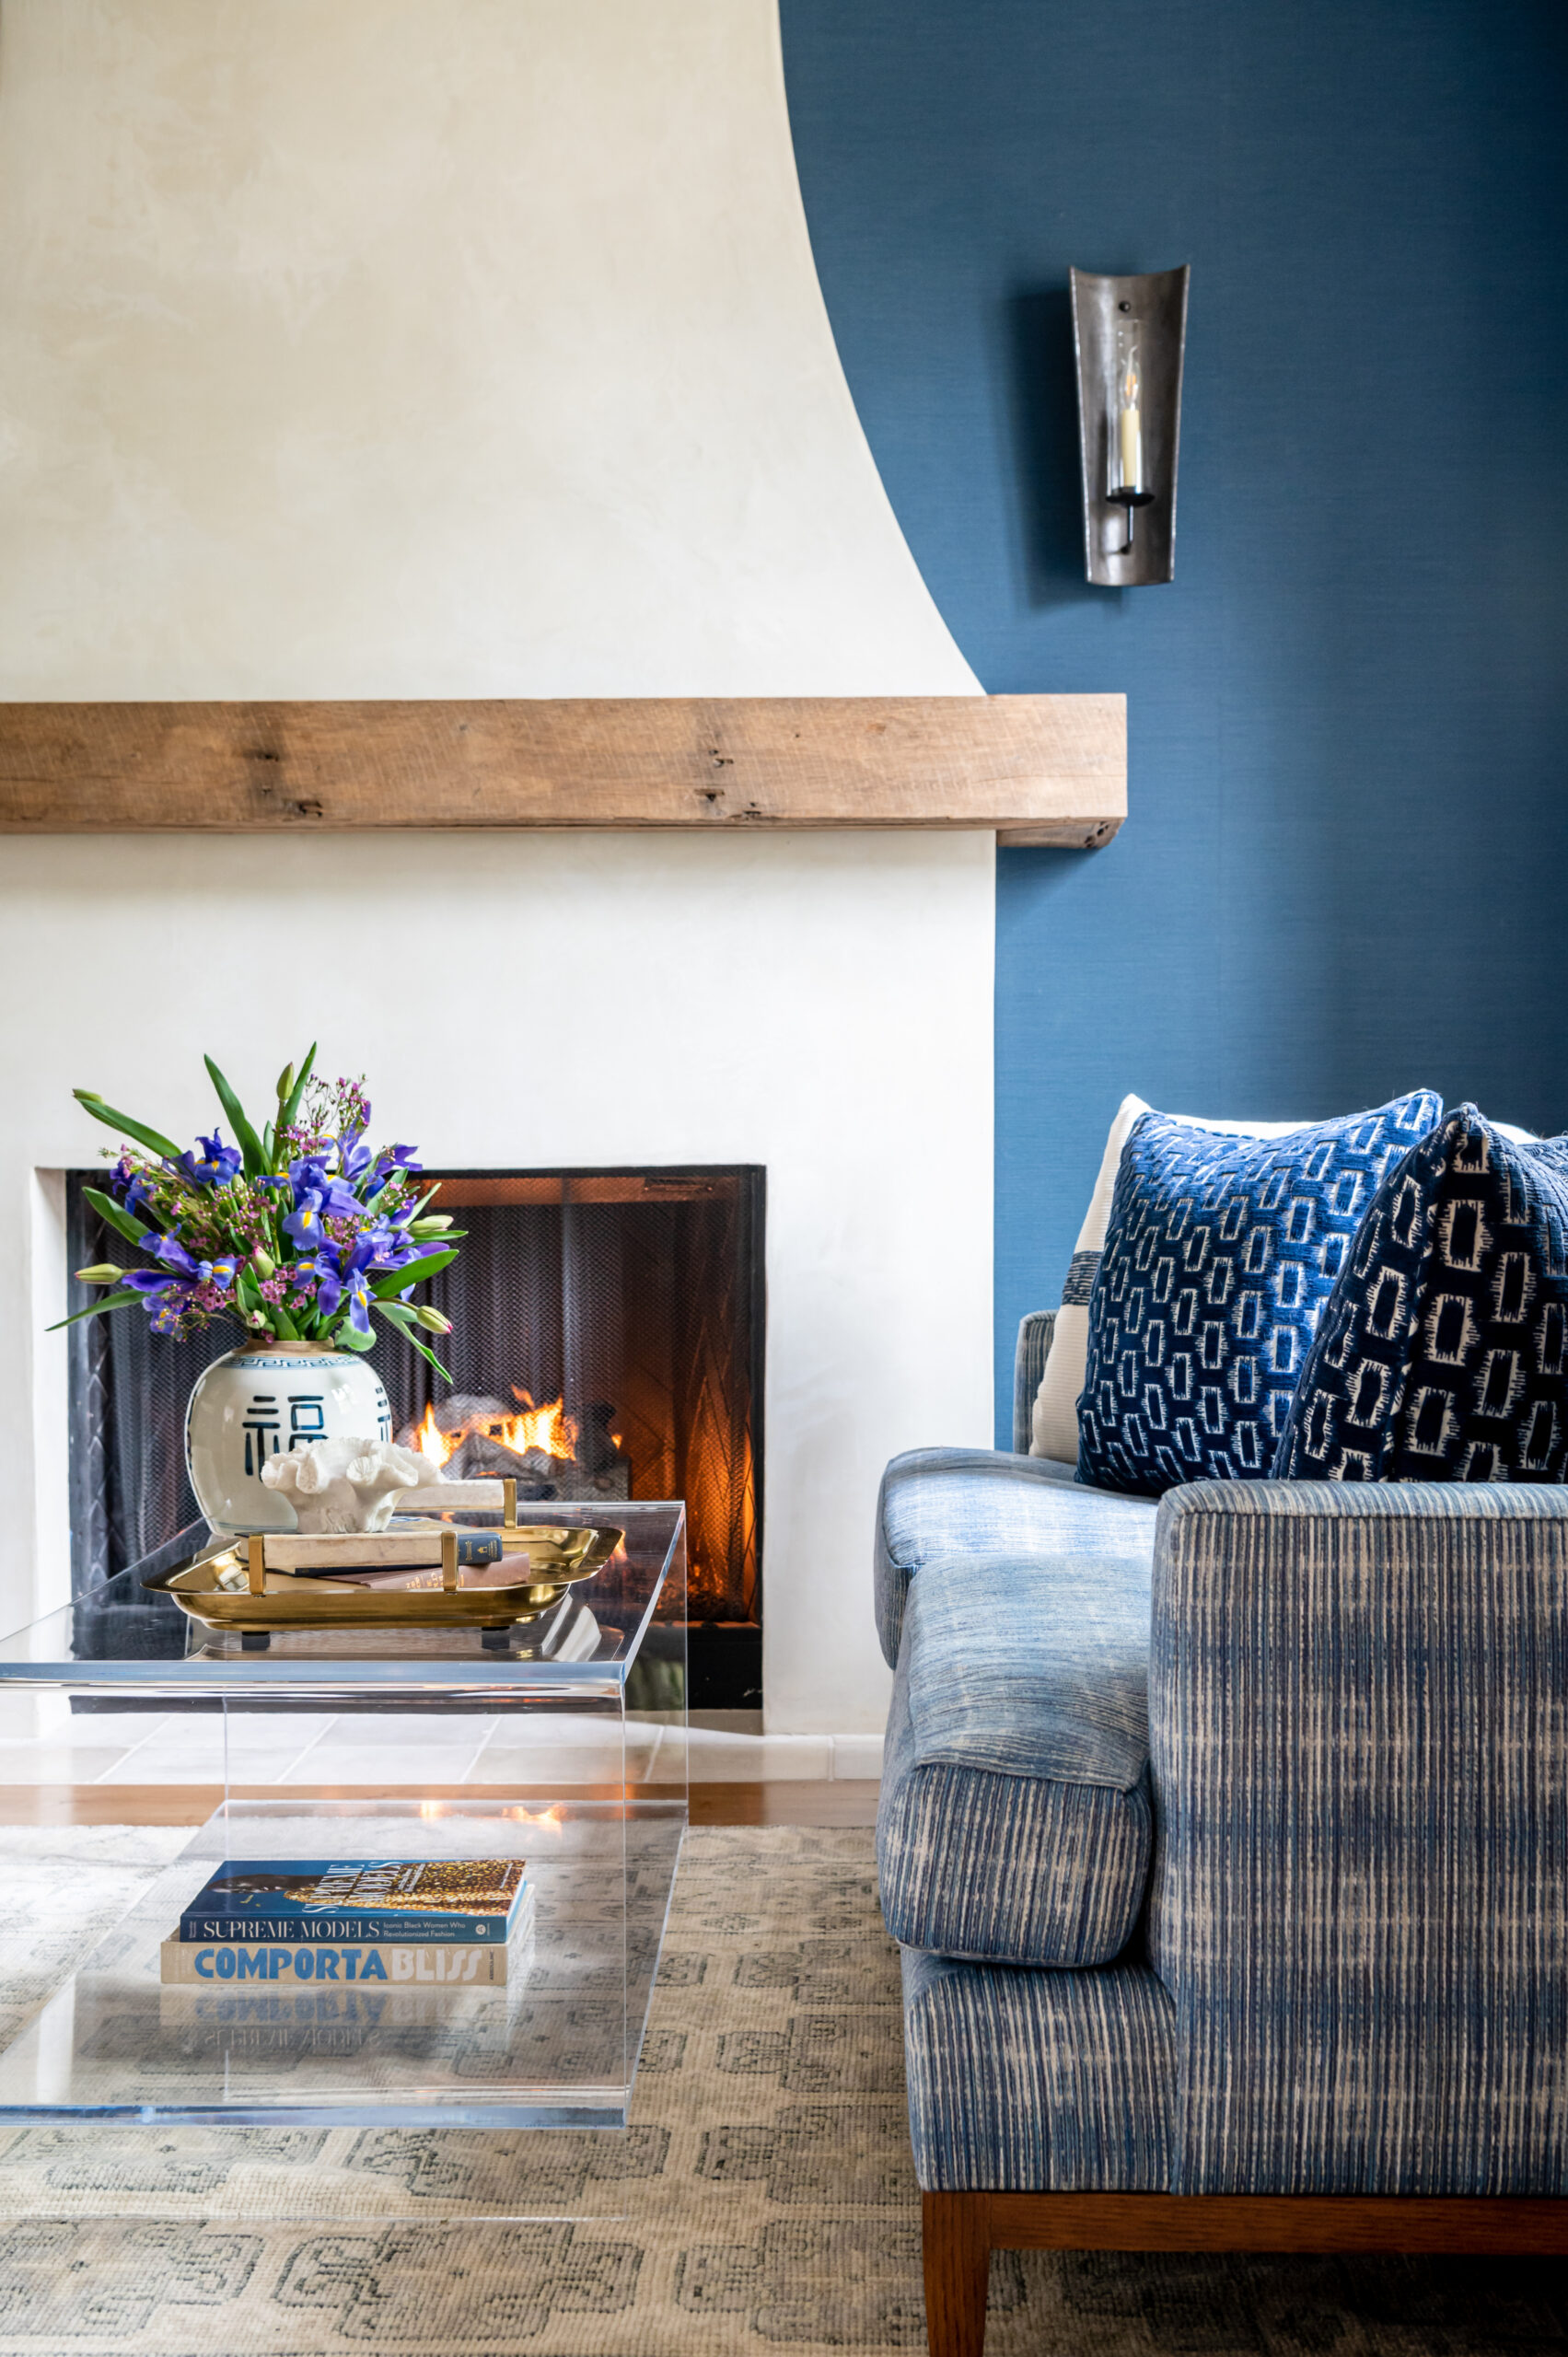 Interior design of living room with blue and colorful details, and a fireplace